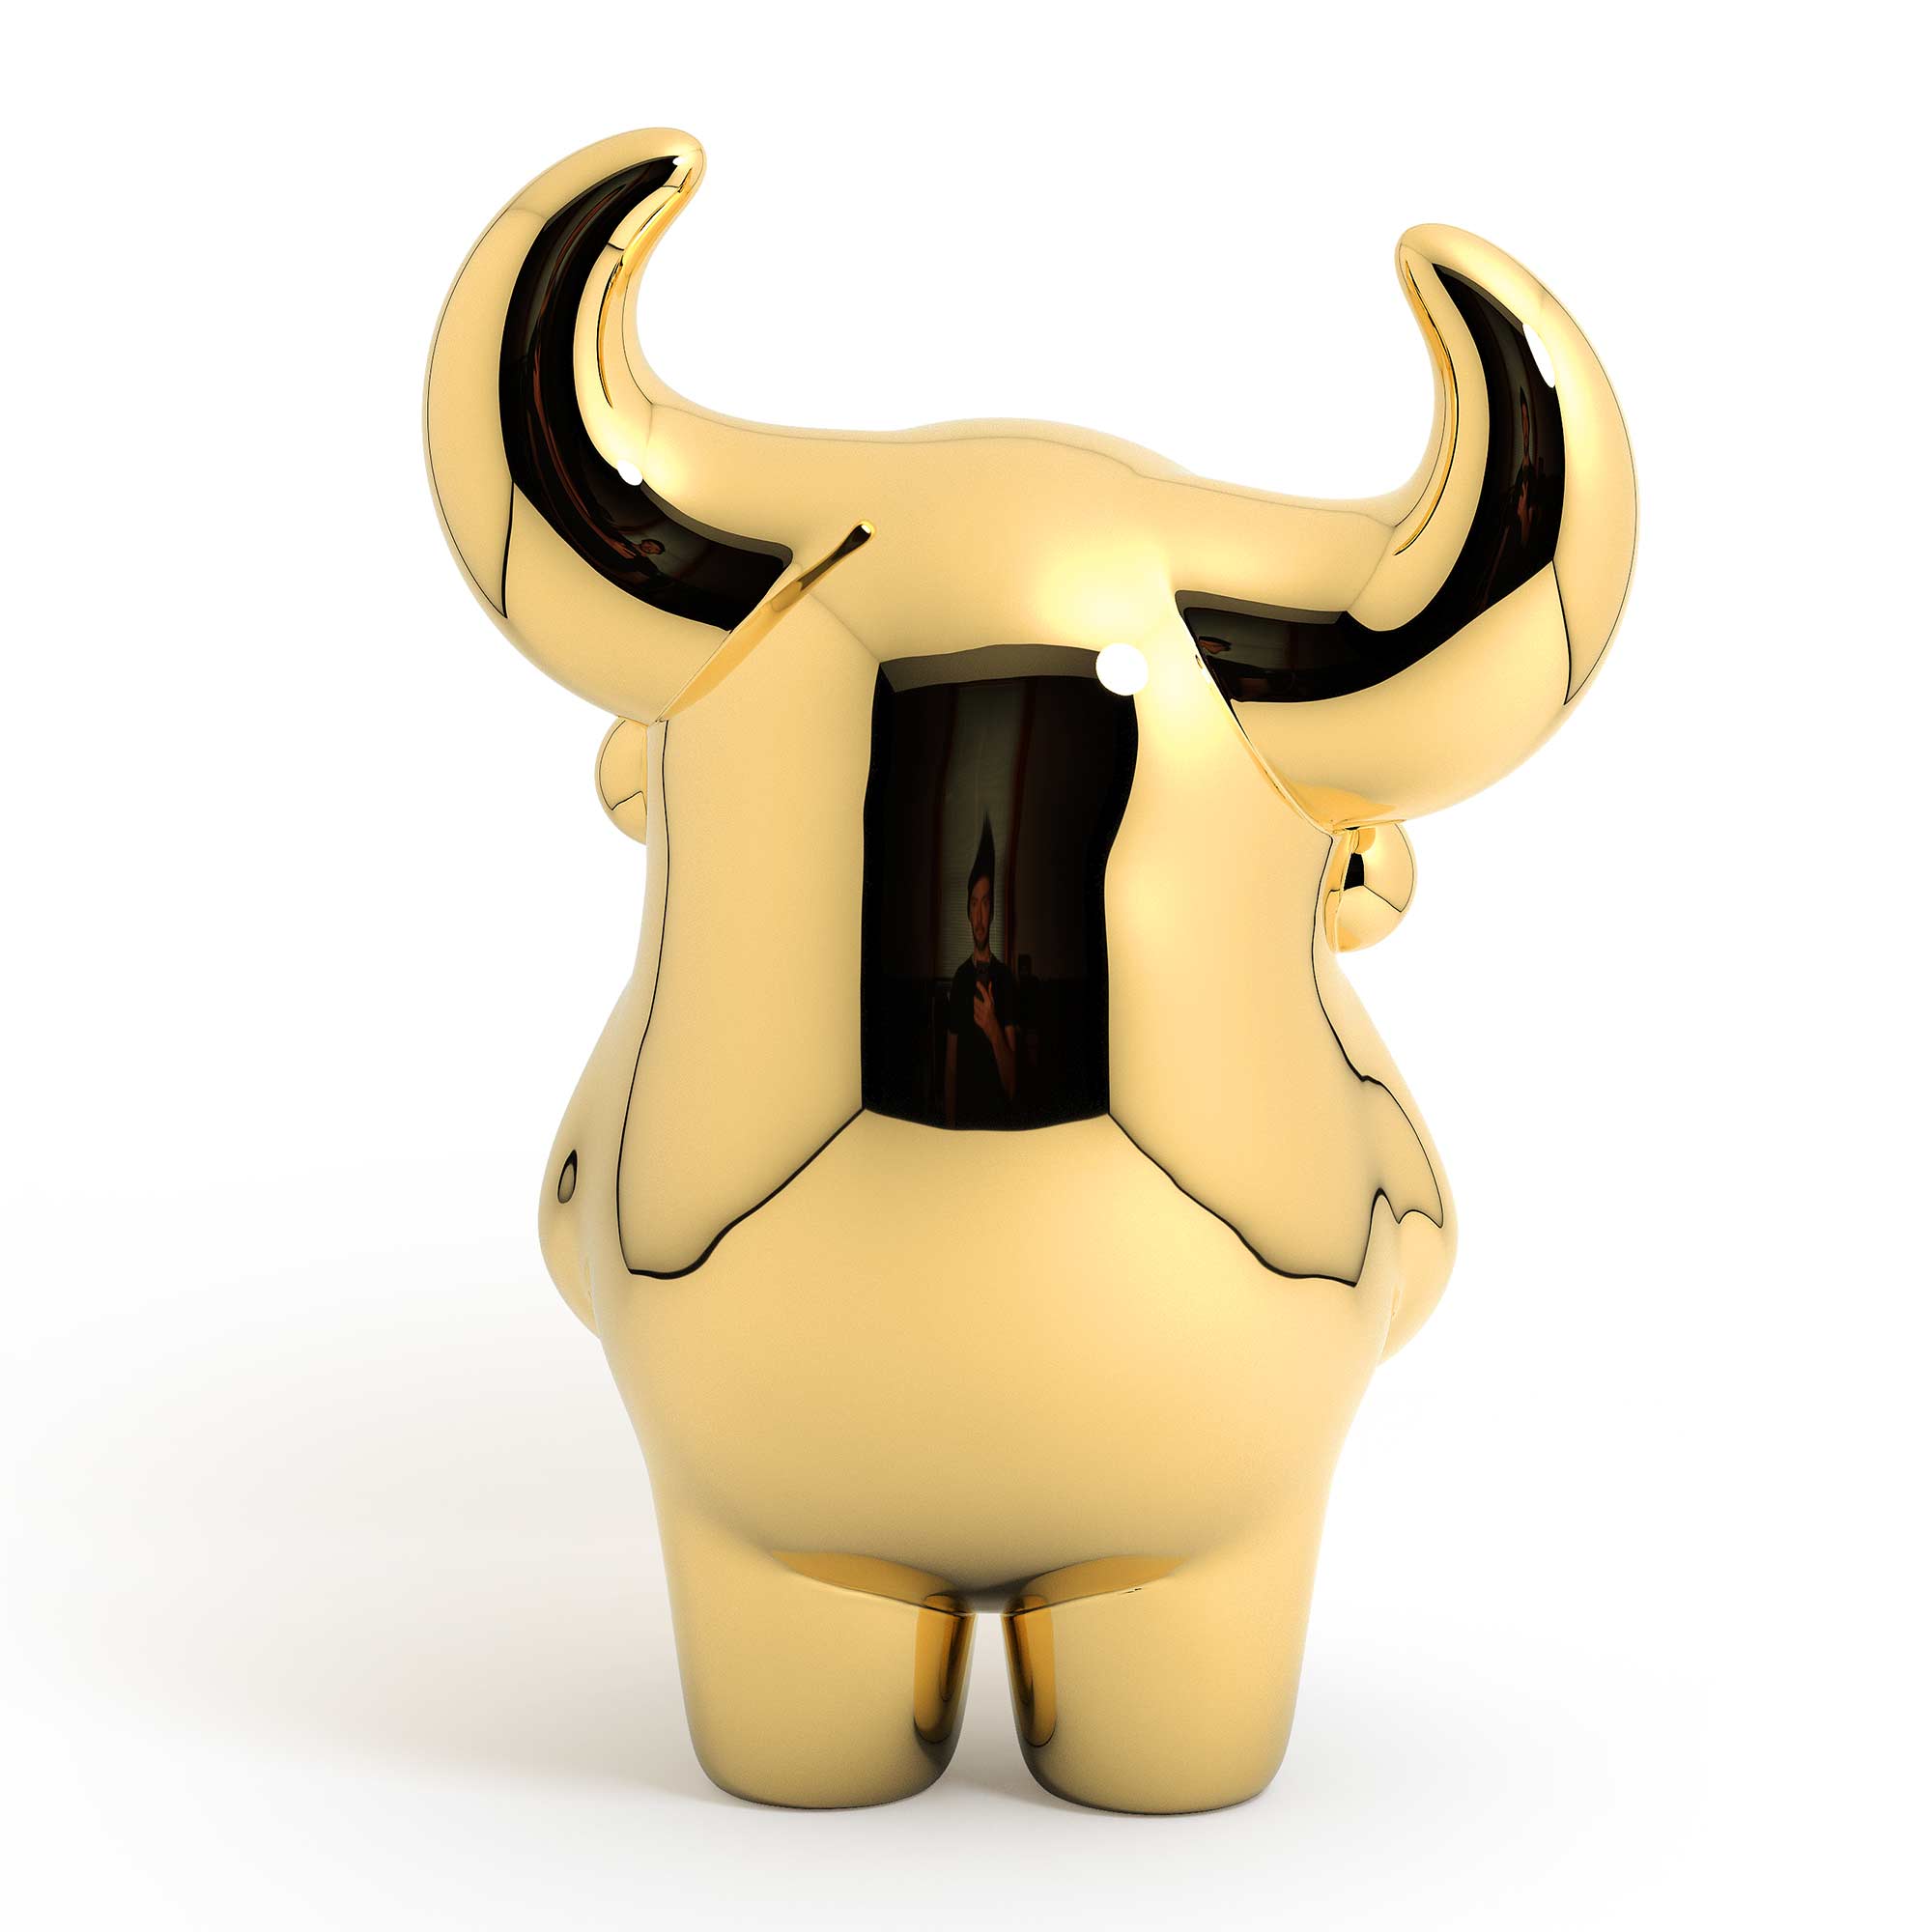 OX “prosperous” bull sculpture, gold plated Mirror Polished Stainless Steel Sculpture, by artist Ferdi B Dick, back view